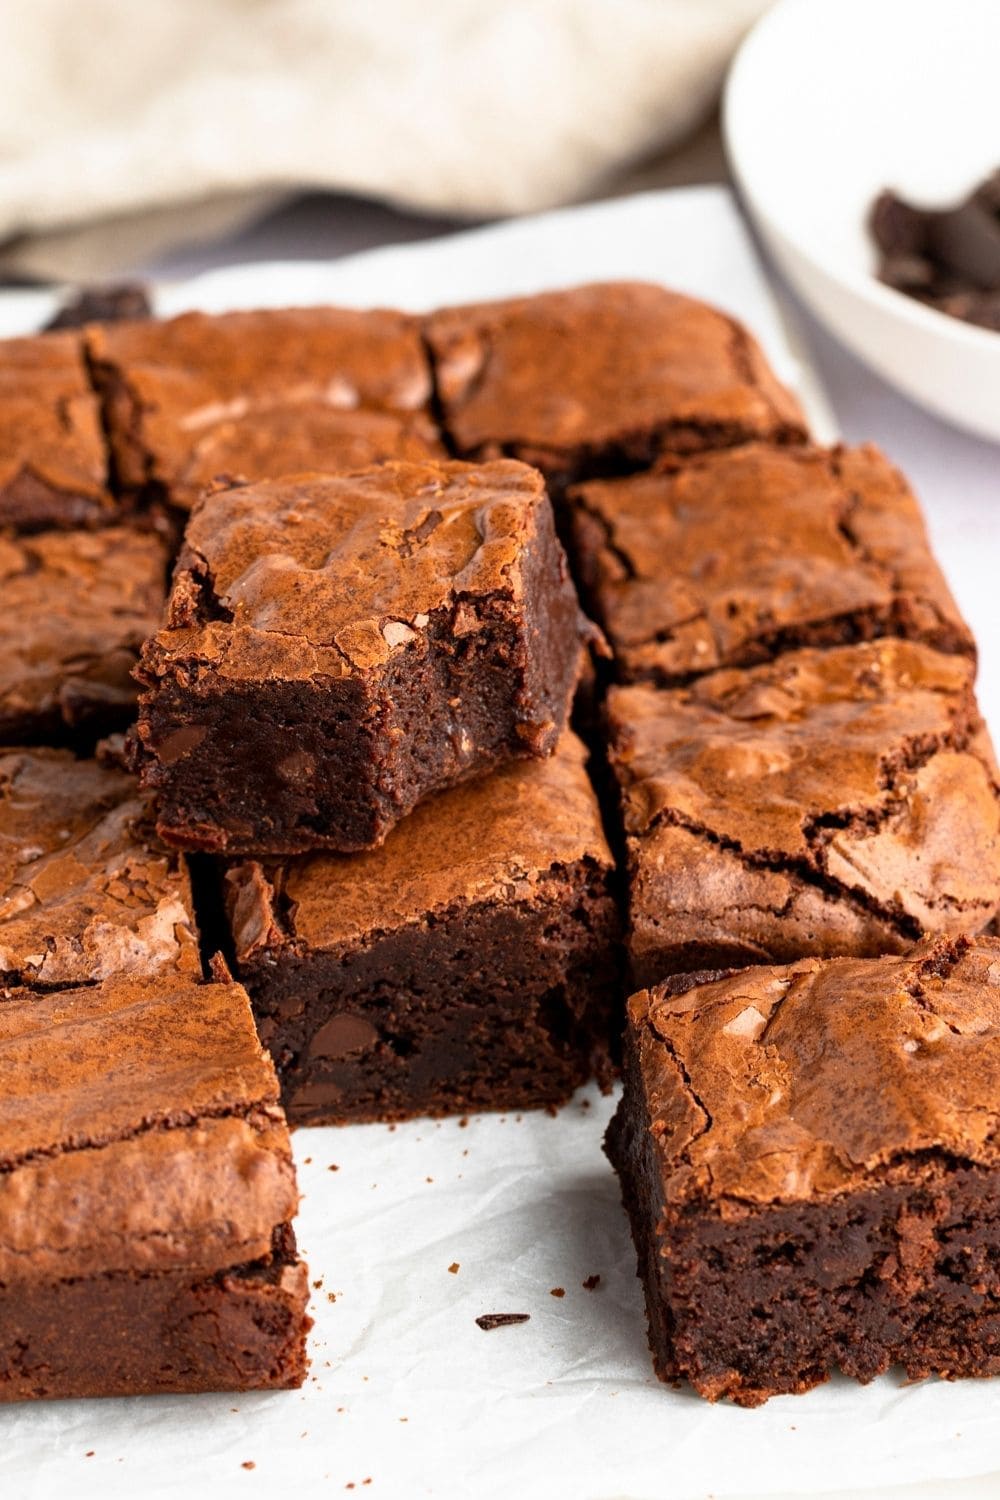 Tray of thick Fudgy Chocolate Brownies with one slice removed